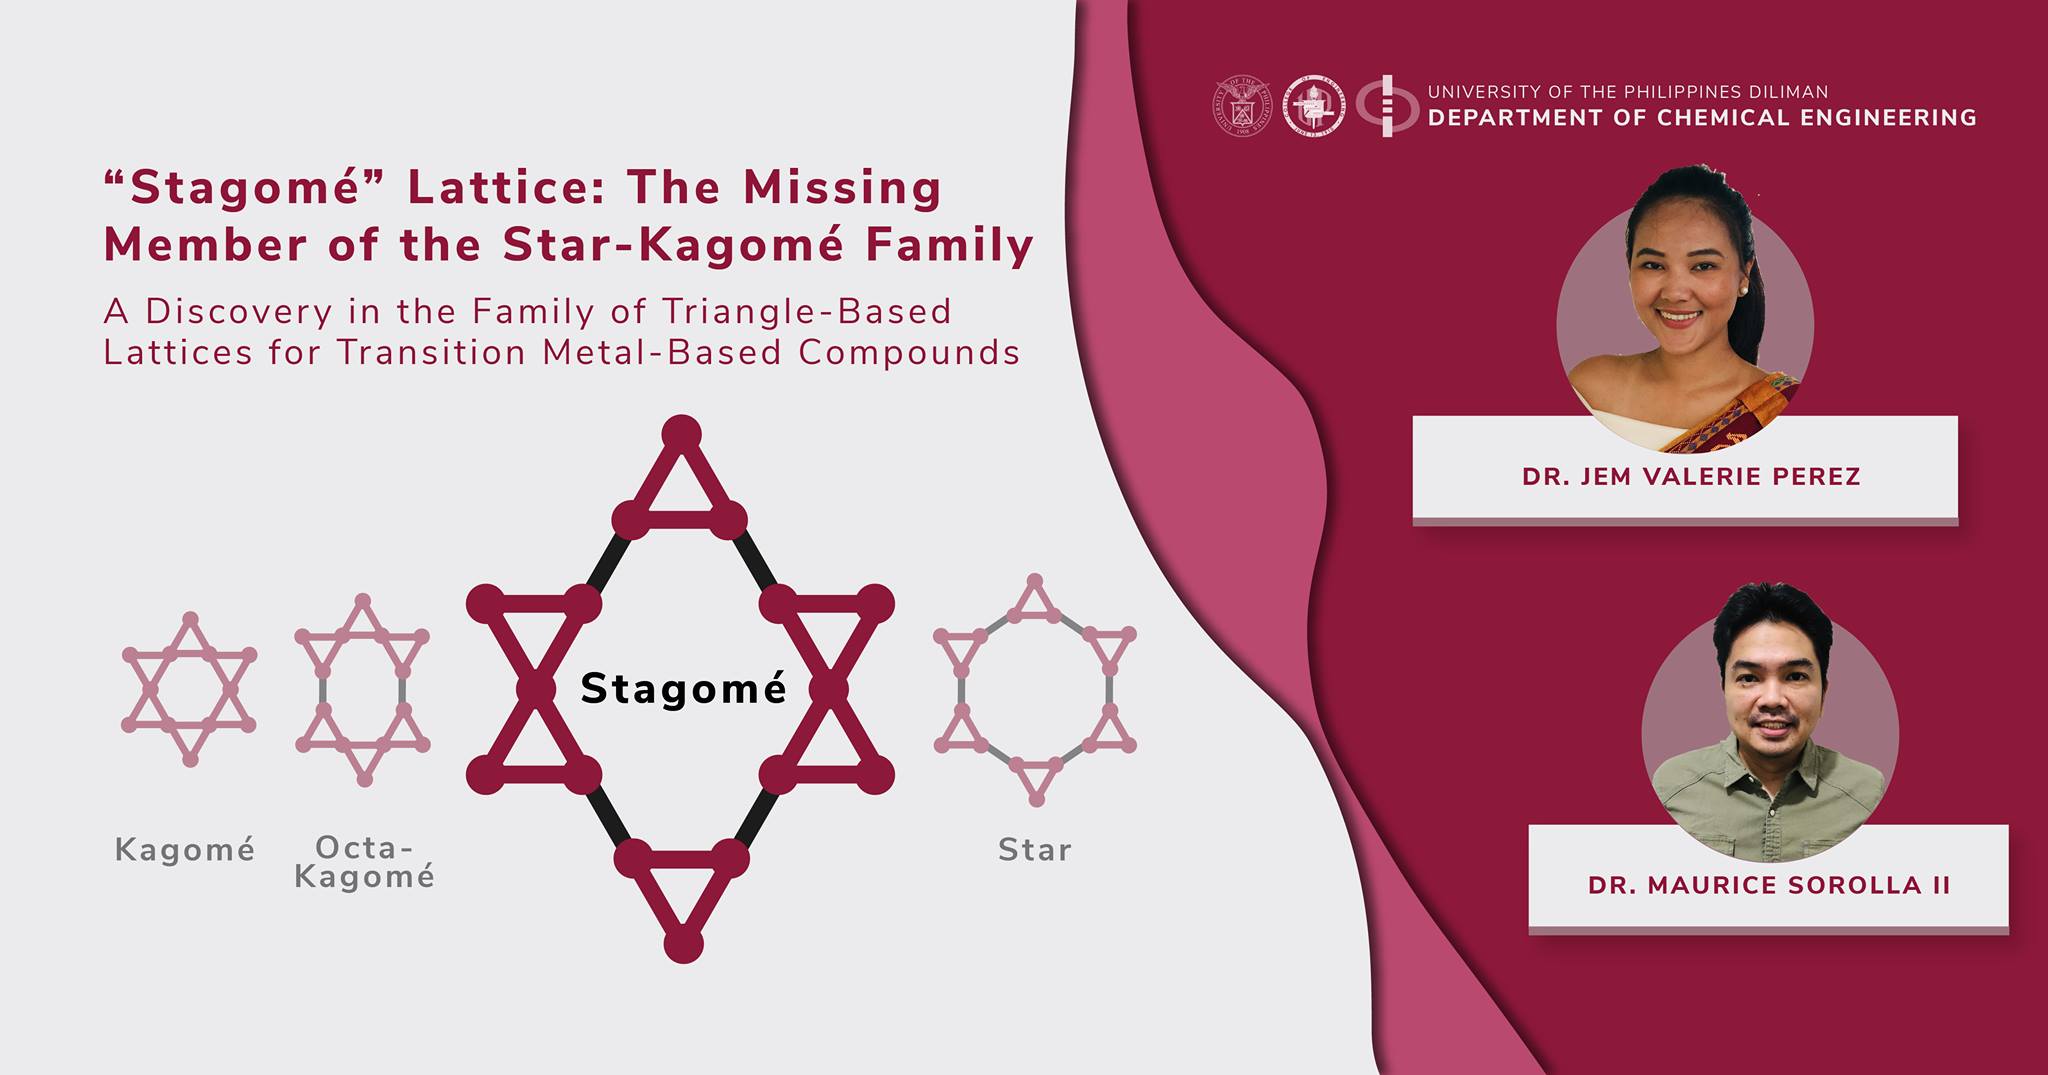 DChE Faculty Couple Discovers Missing Link in the Star-Kagomé Family of Triangle-Based Lattices for Transition Metal-Based Compounds